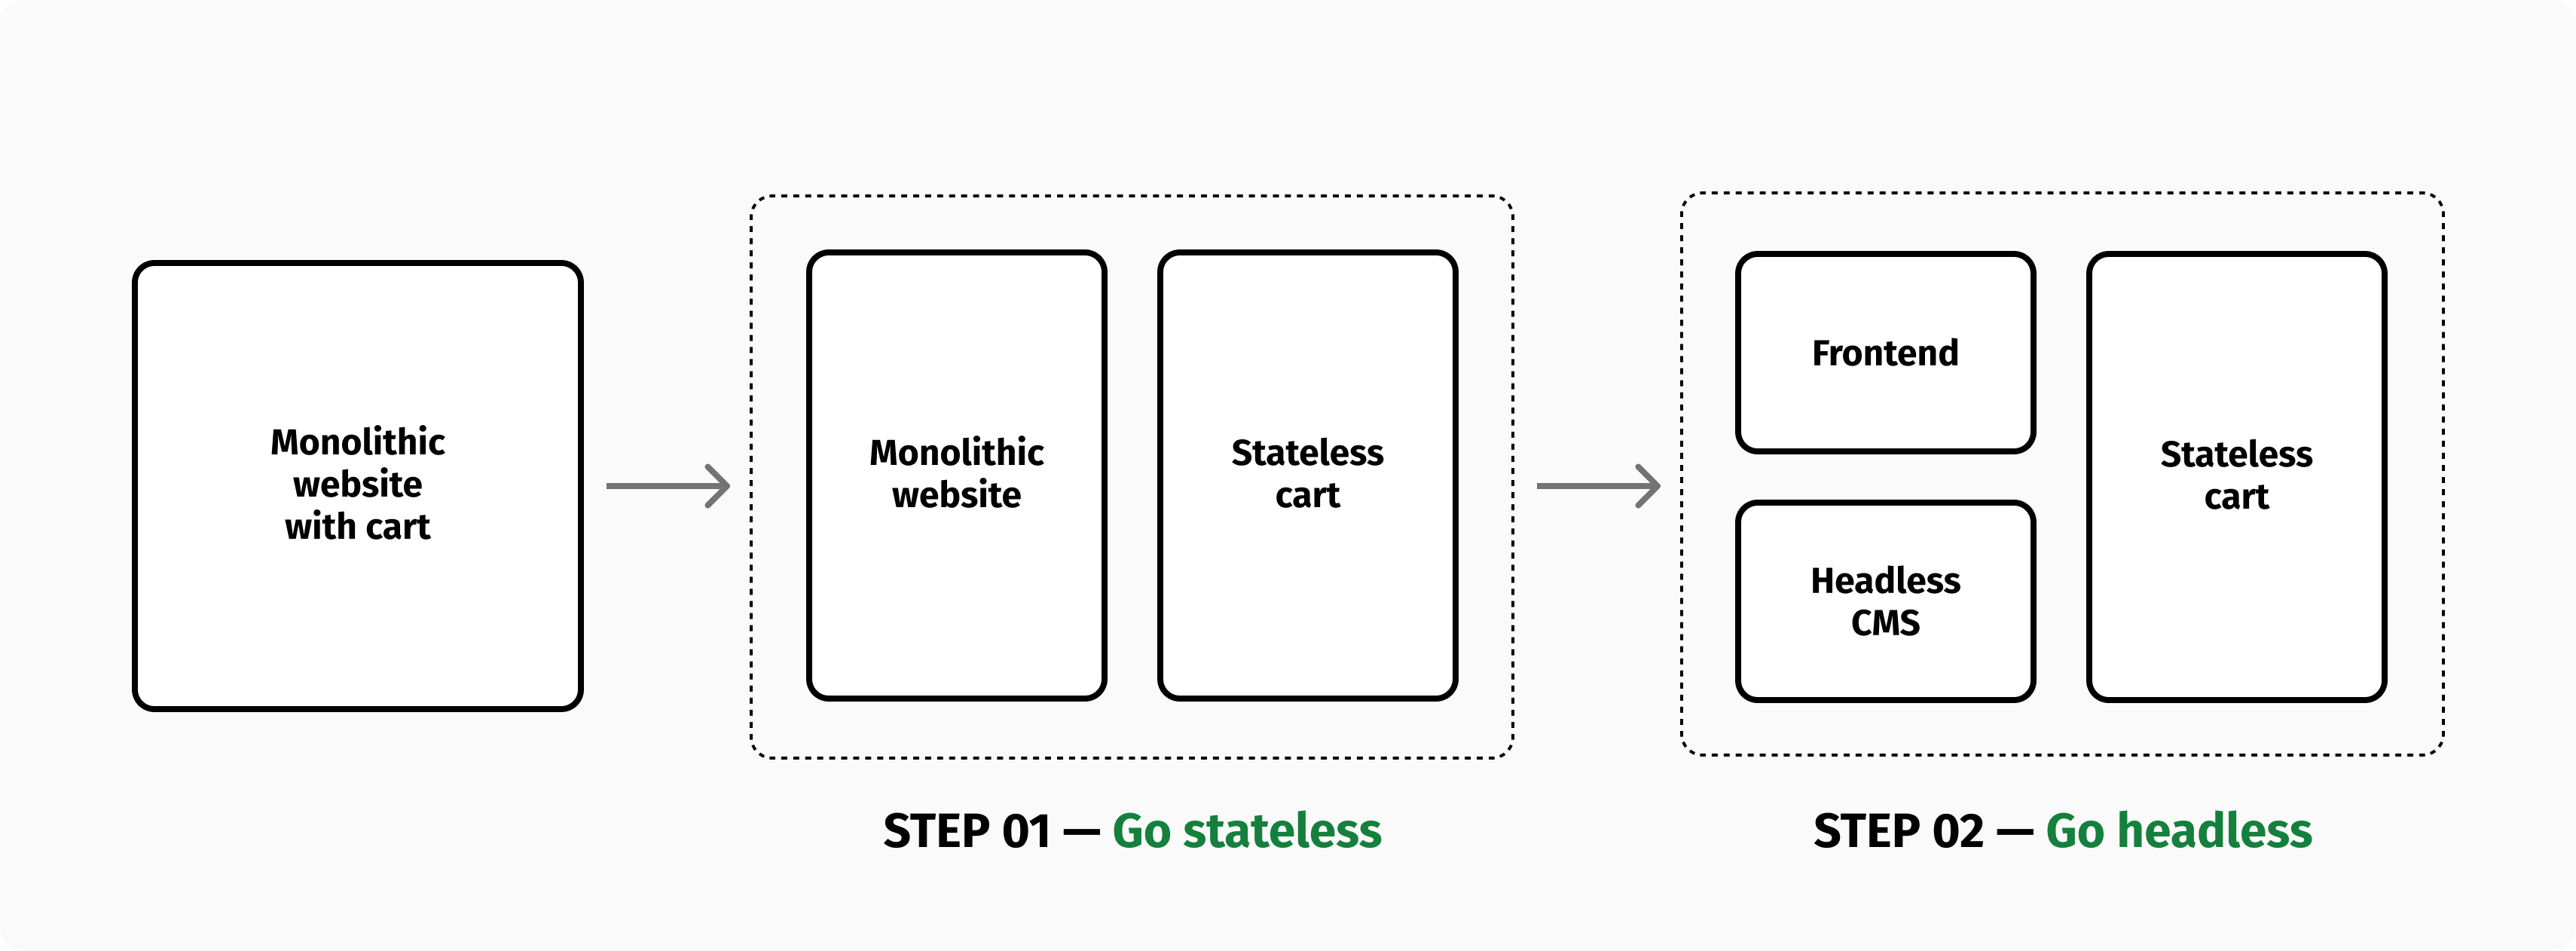 You need to go stateless before going headless.